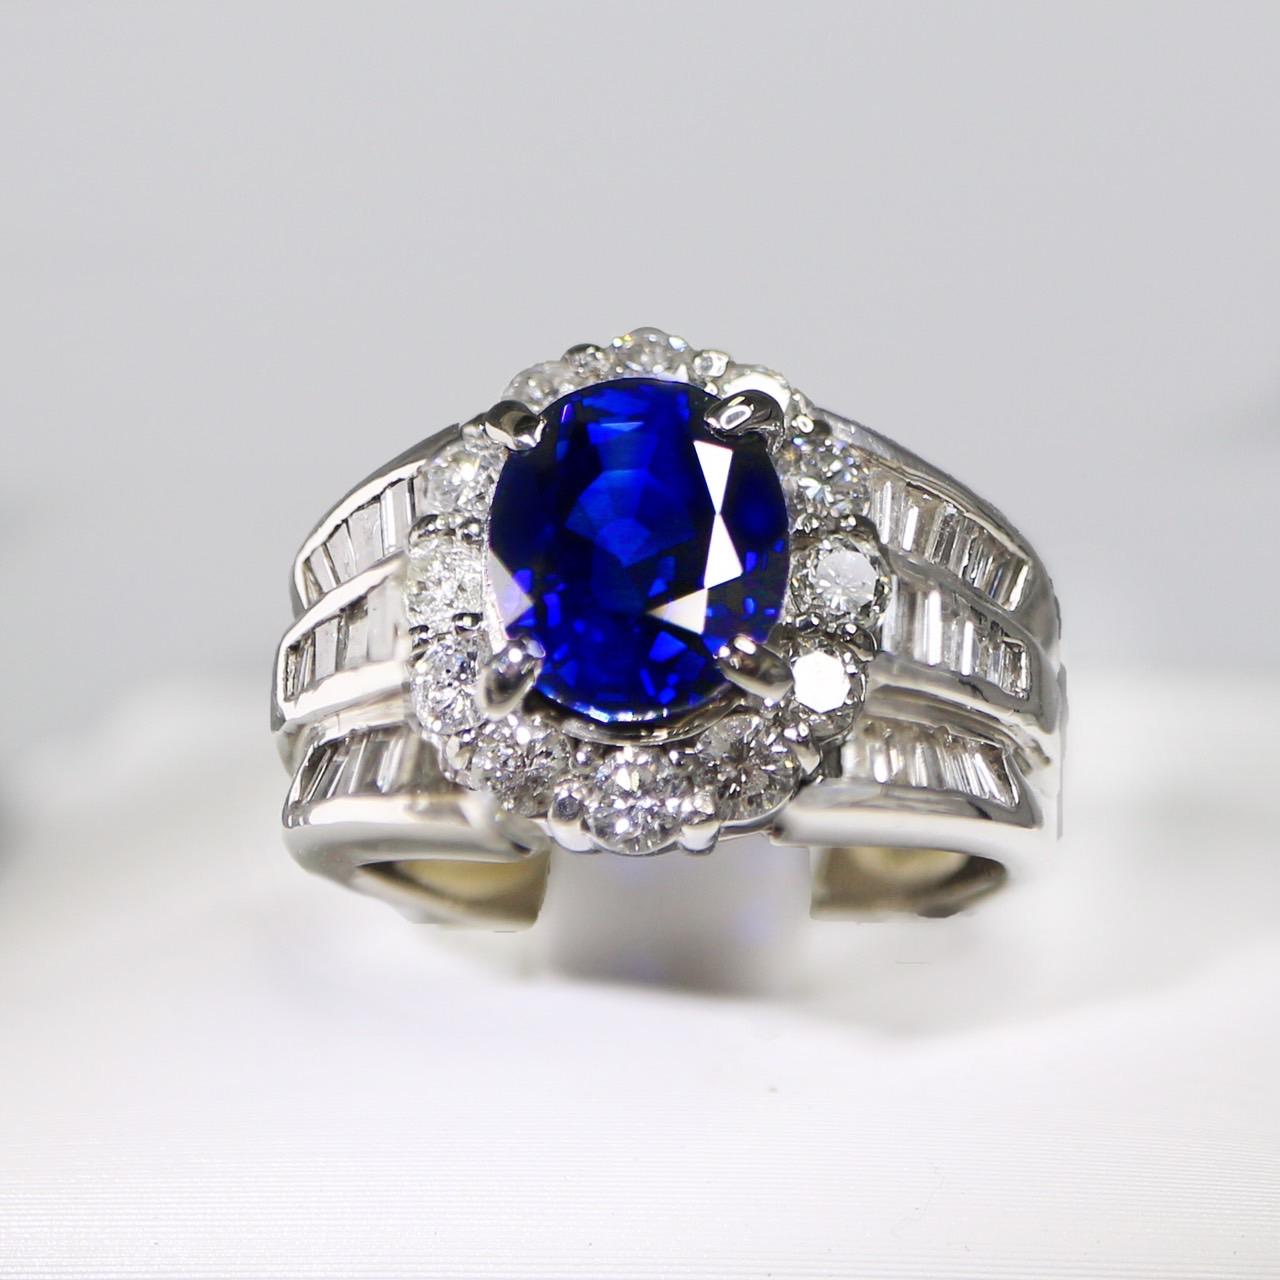 Certified PT900 3.30 ct Royal Blue Sapphire Art Deco Engagement Ring For Sale 2